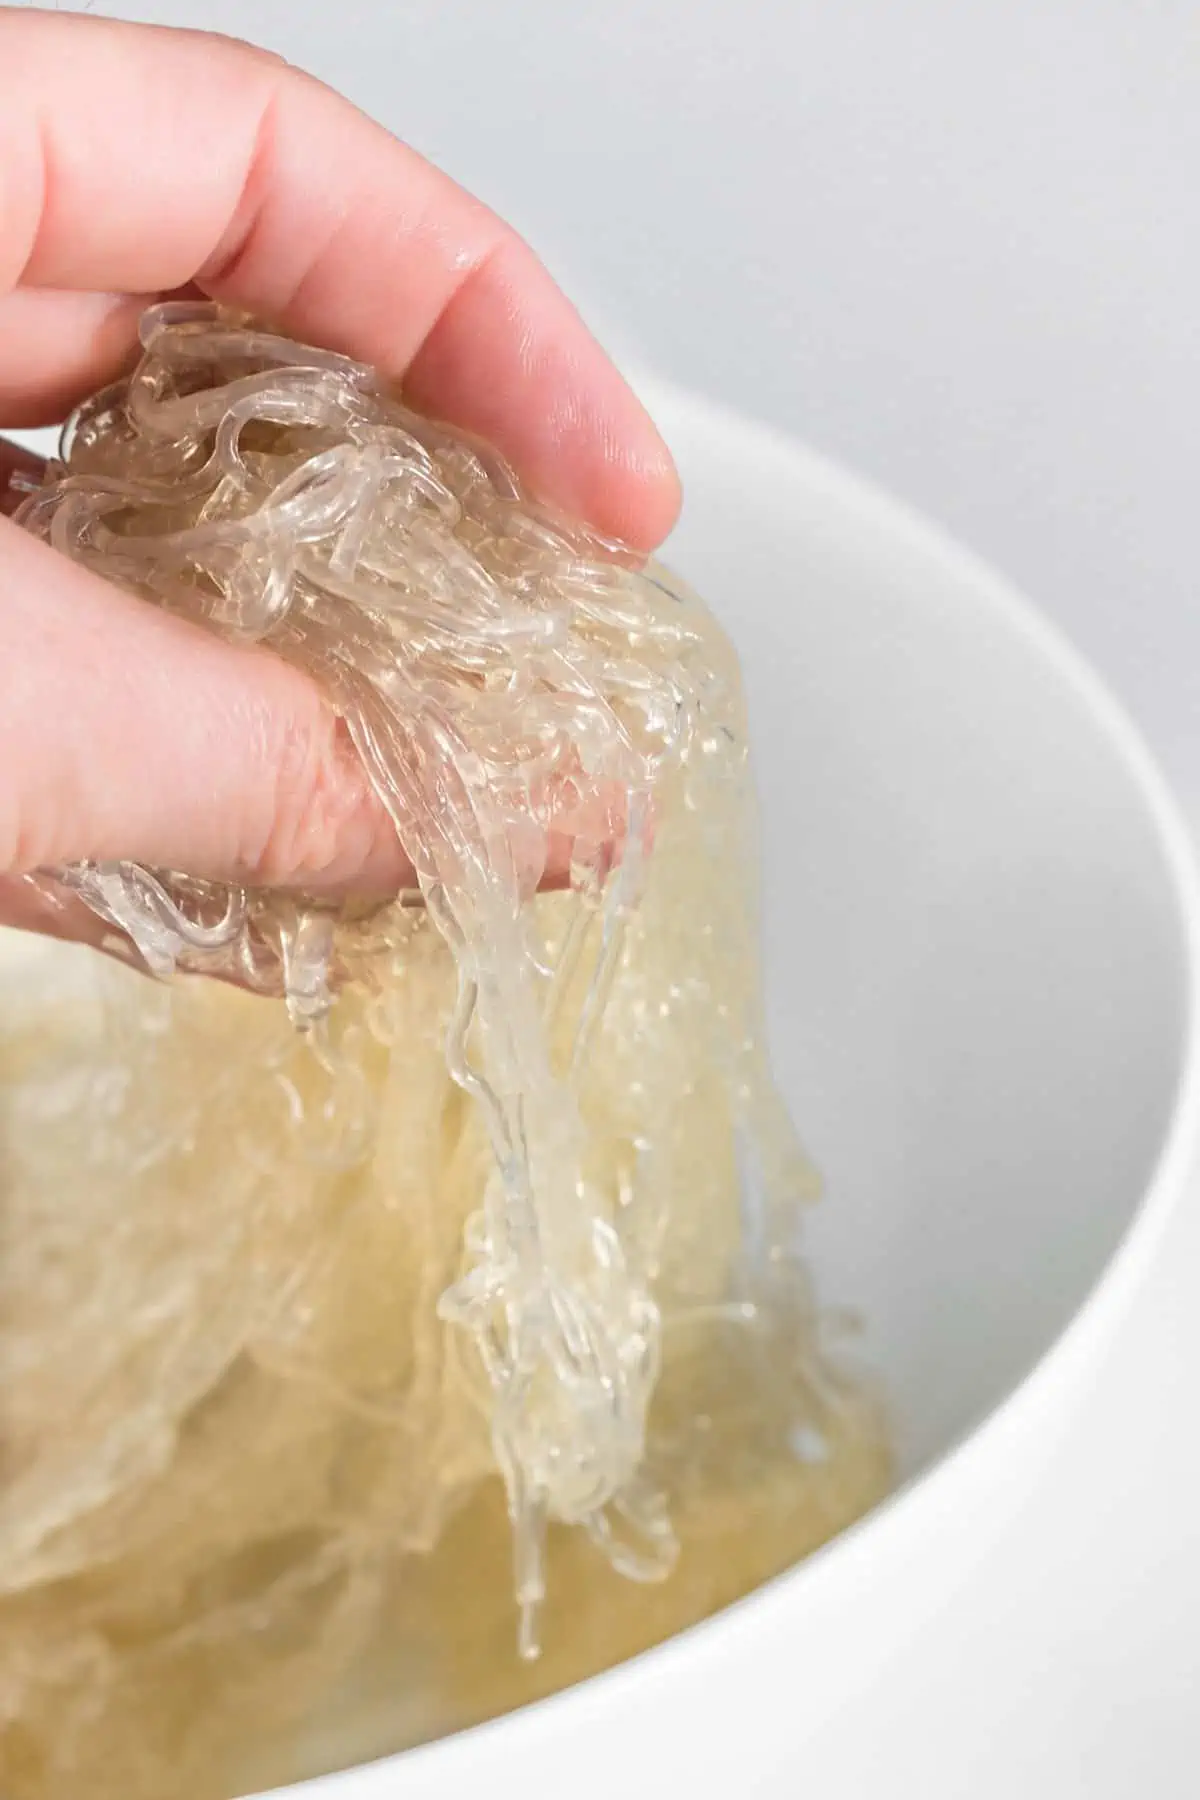 Hand holding up kelp noodles from a bowl after soaking.